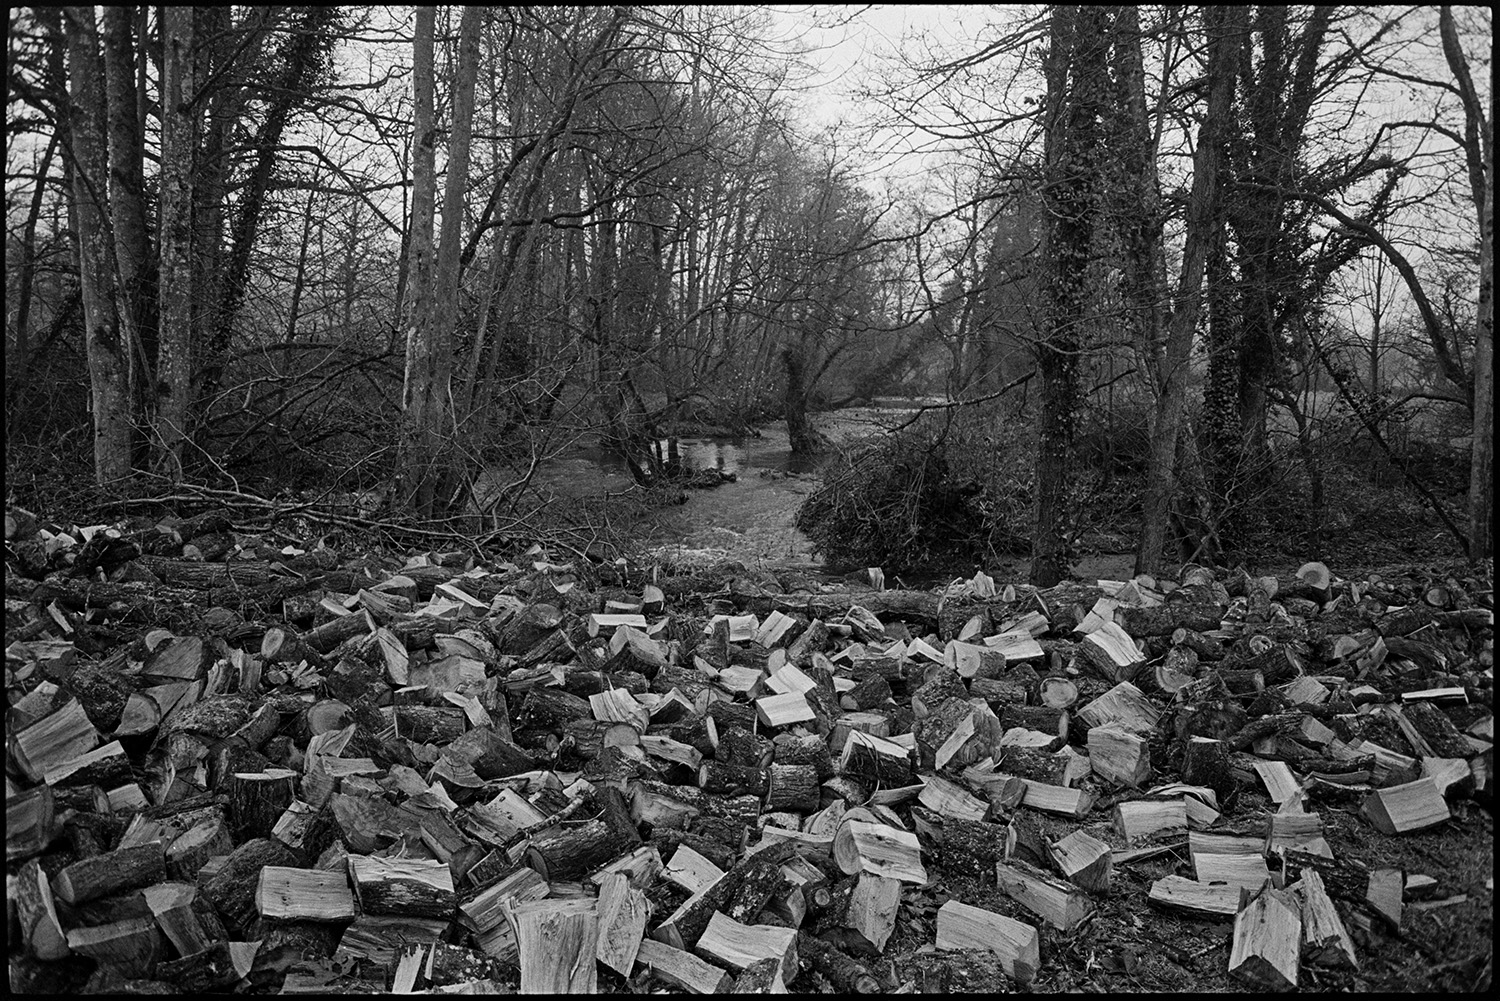 Vast pile of cut logs from trees cleared from ancient castle mound.
[A large pile of cut logs on the tree lined banks of a small river at Millsome near Winkleigh.]